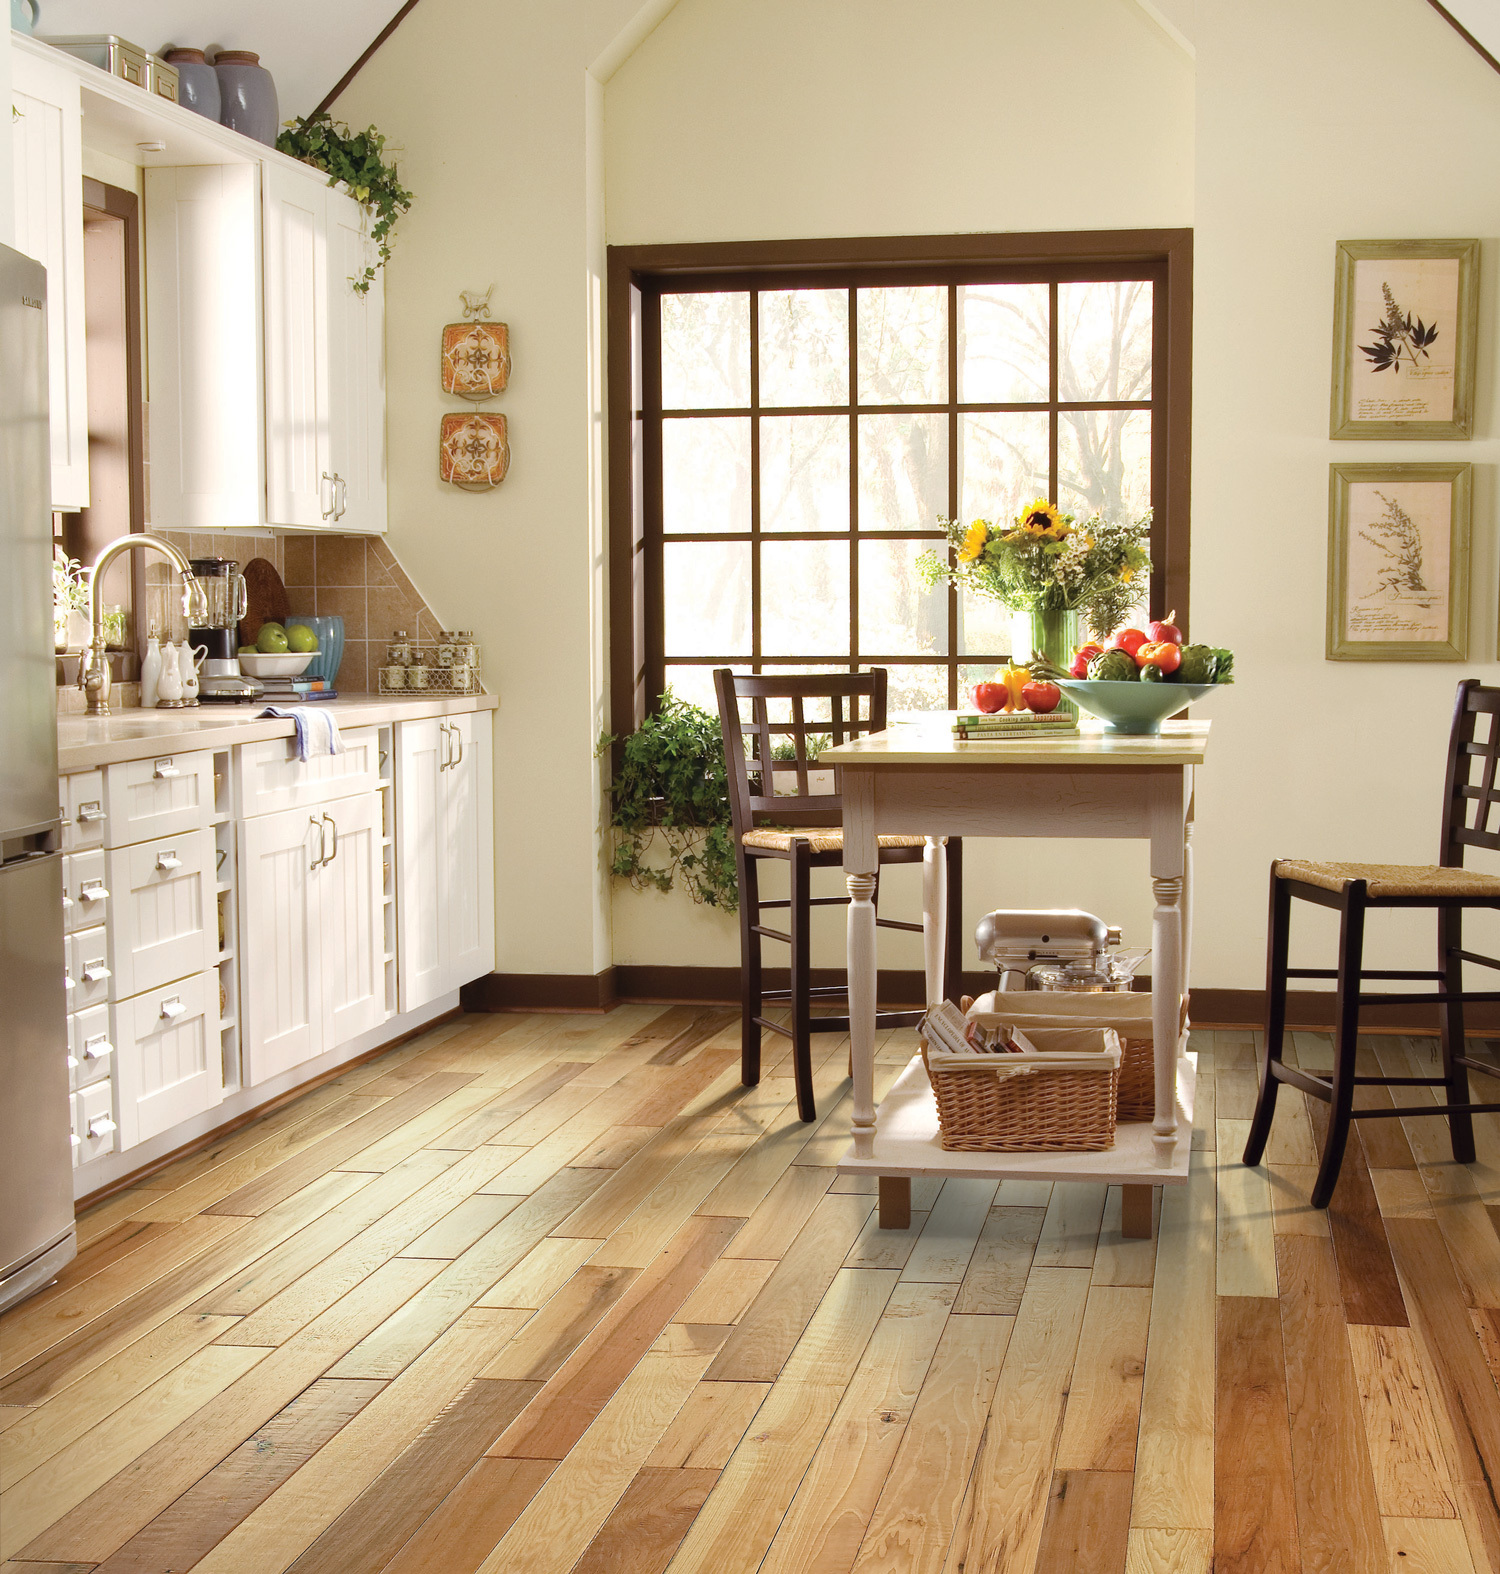 A bright kitchen featuring a rustic look and a large window onlooking some trees